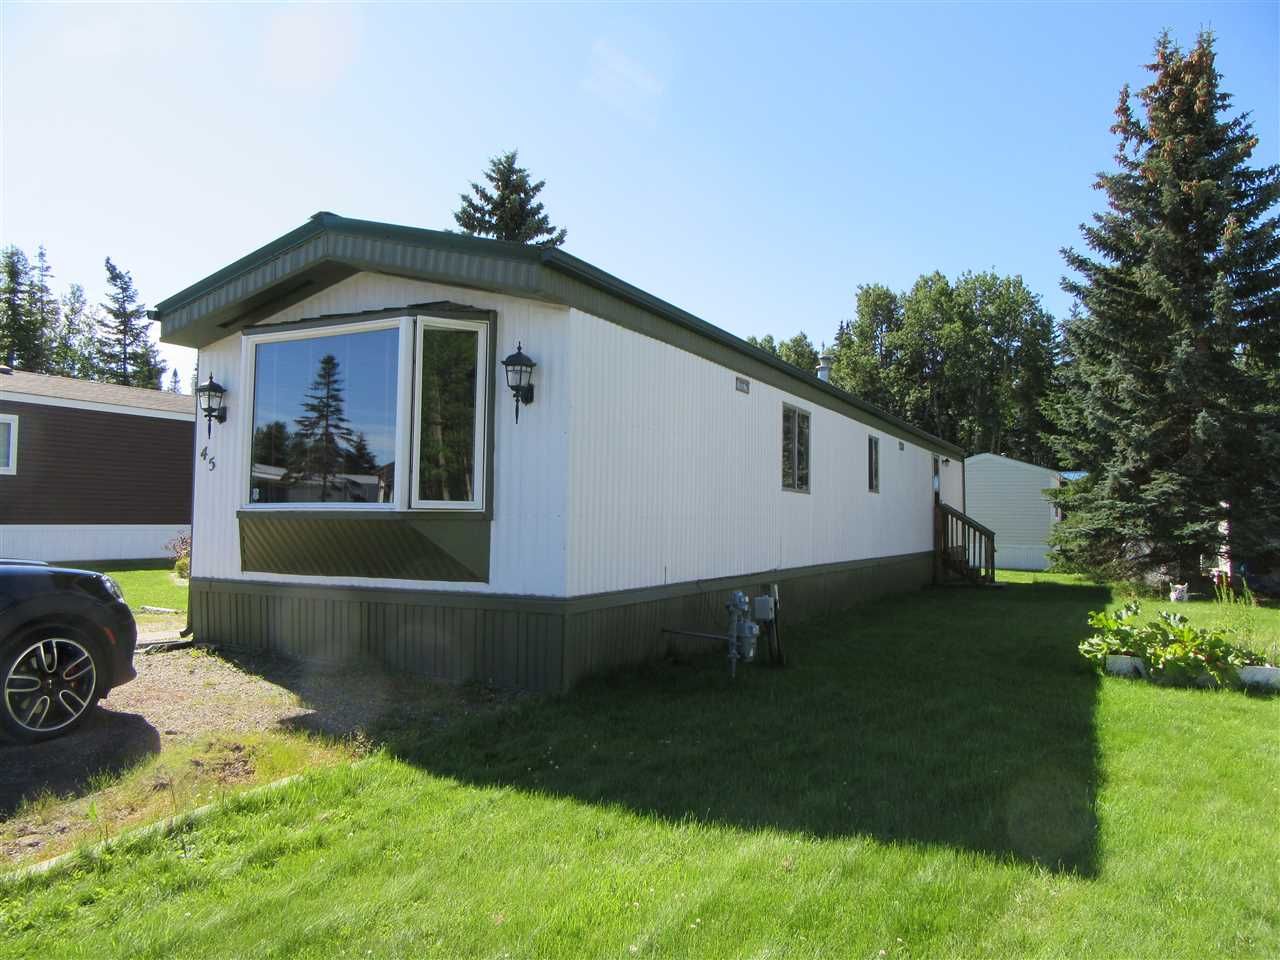 Main Photo: 45 7817 S 97 Highway in Prince George: Sintich Manufactured Home for sale (PG City South East (Zone 75))  : MLS®# R2484401